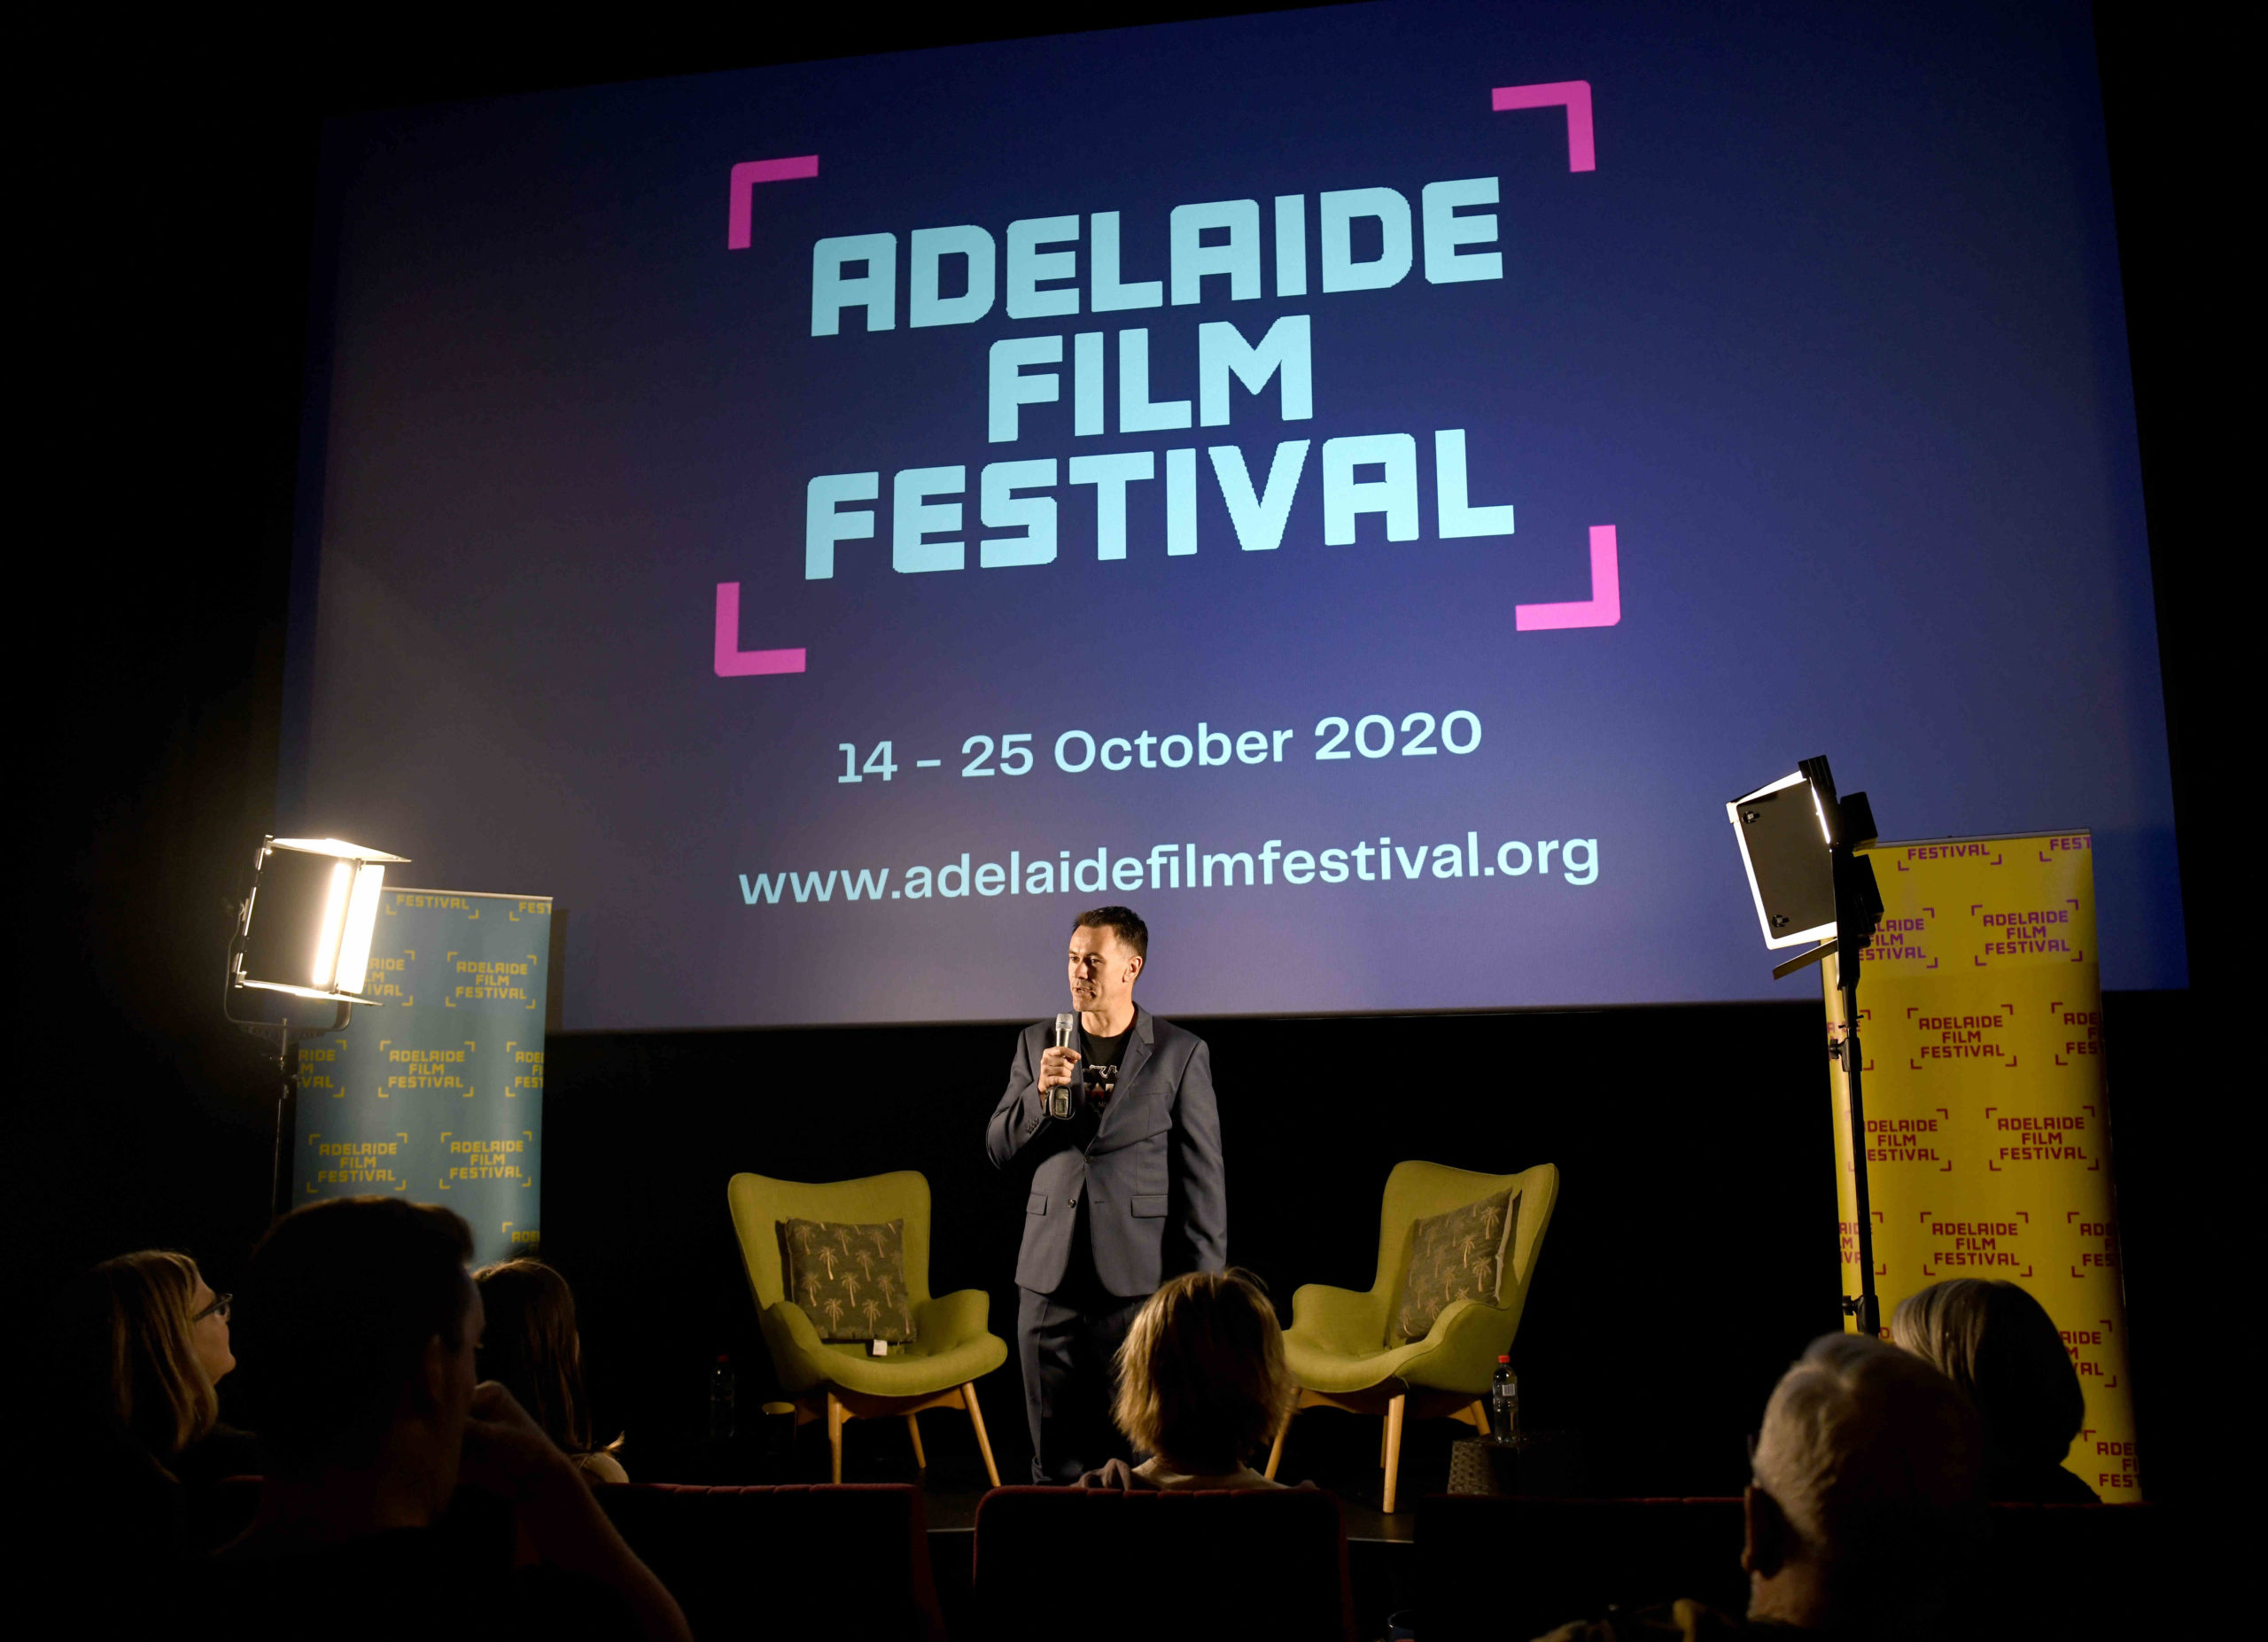 Adelaide Film Festival make an Investment into the Future of Film